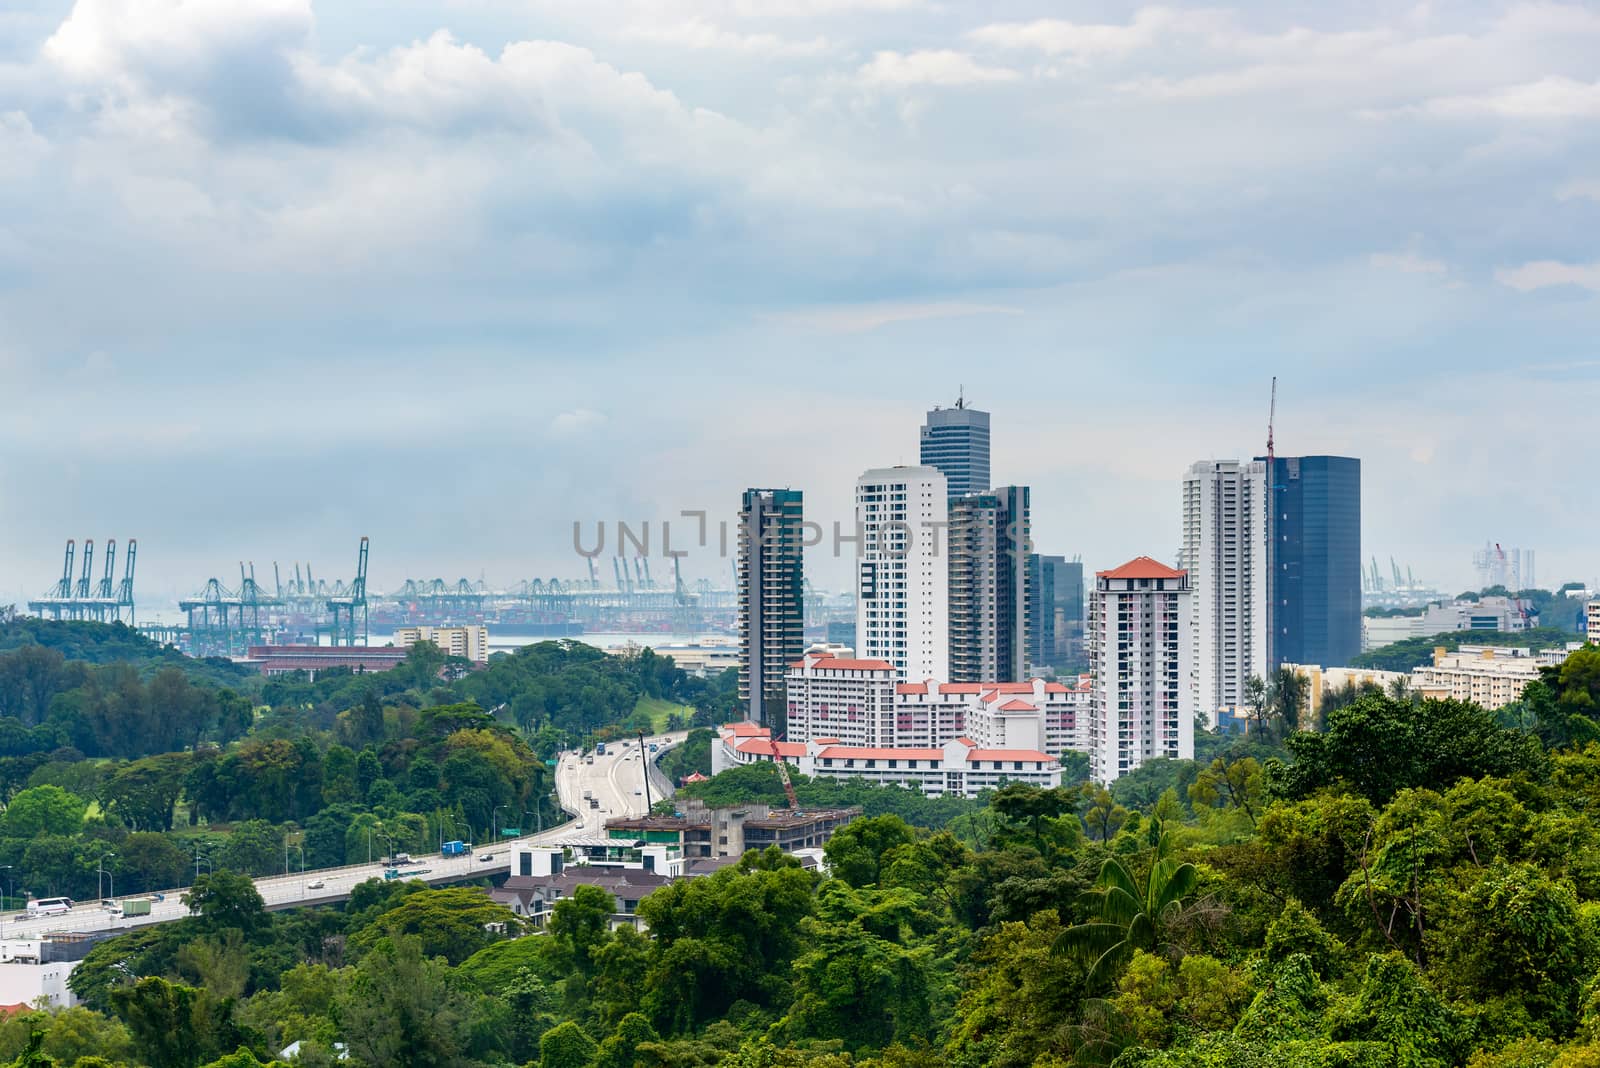 View from Mount Faber Park in Singapore by dutourdumonde